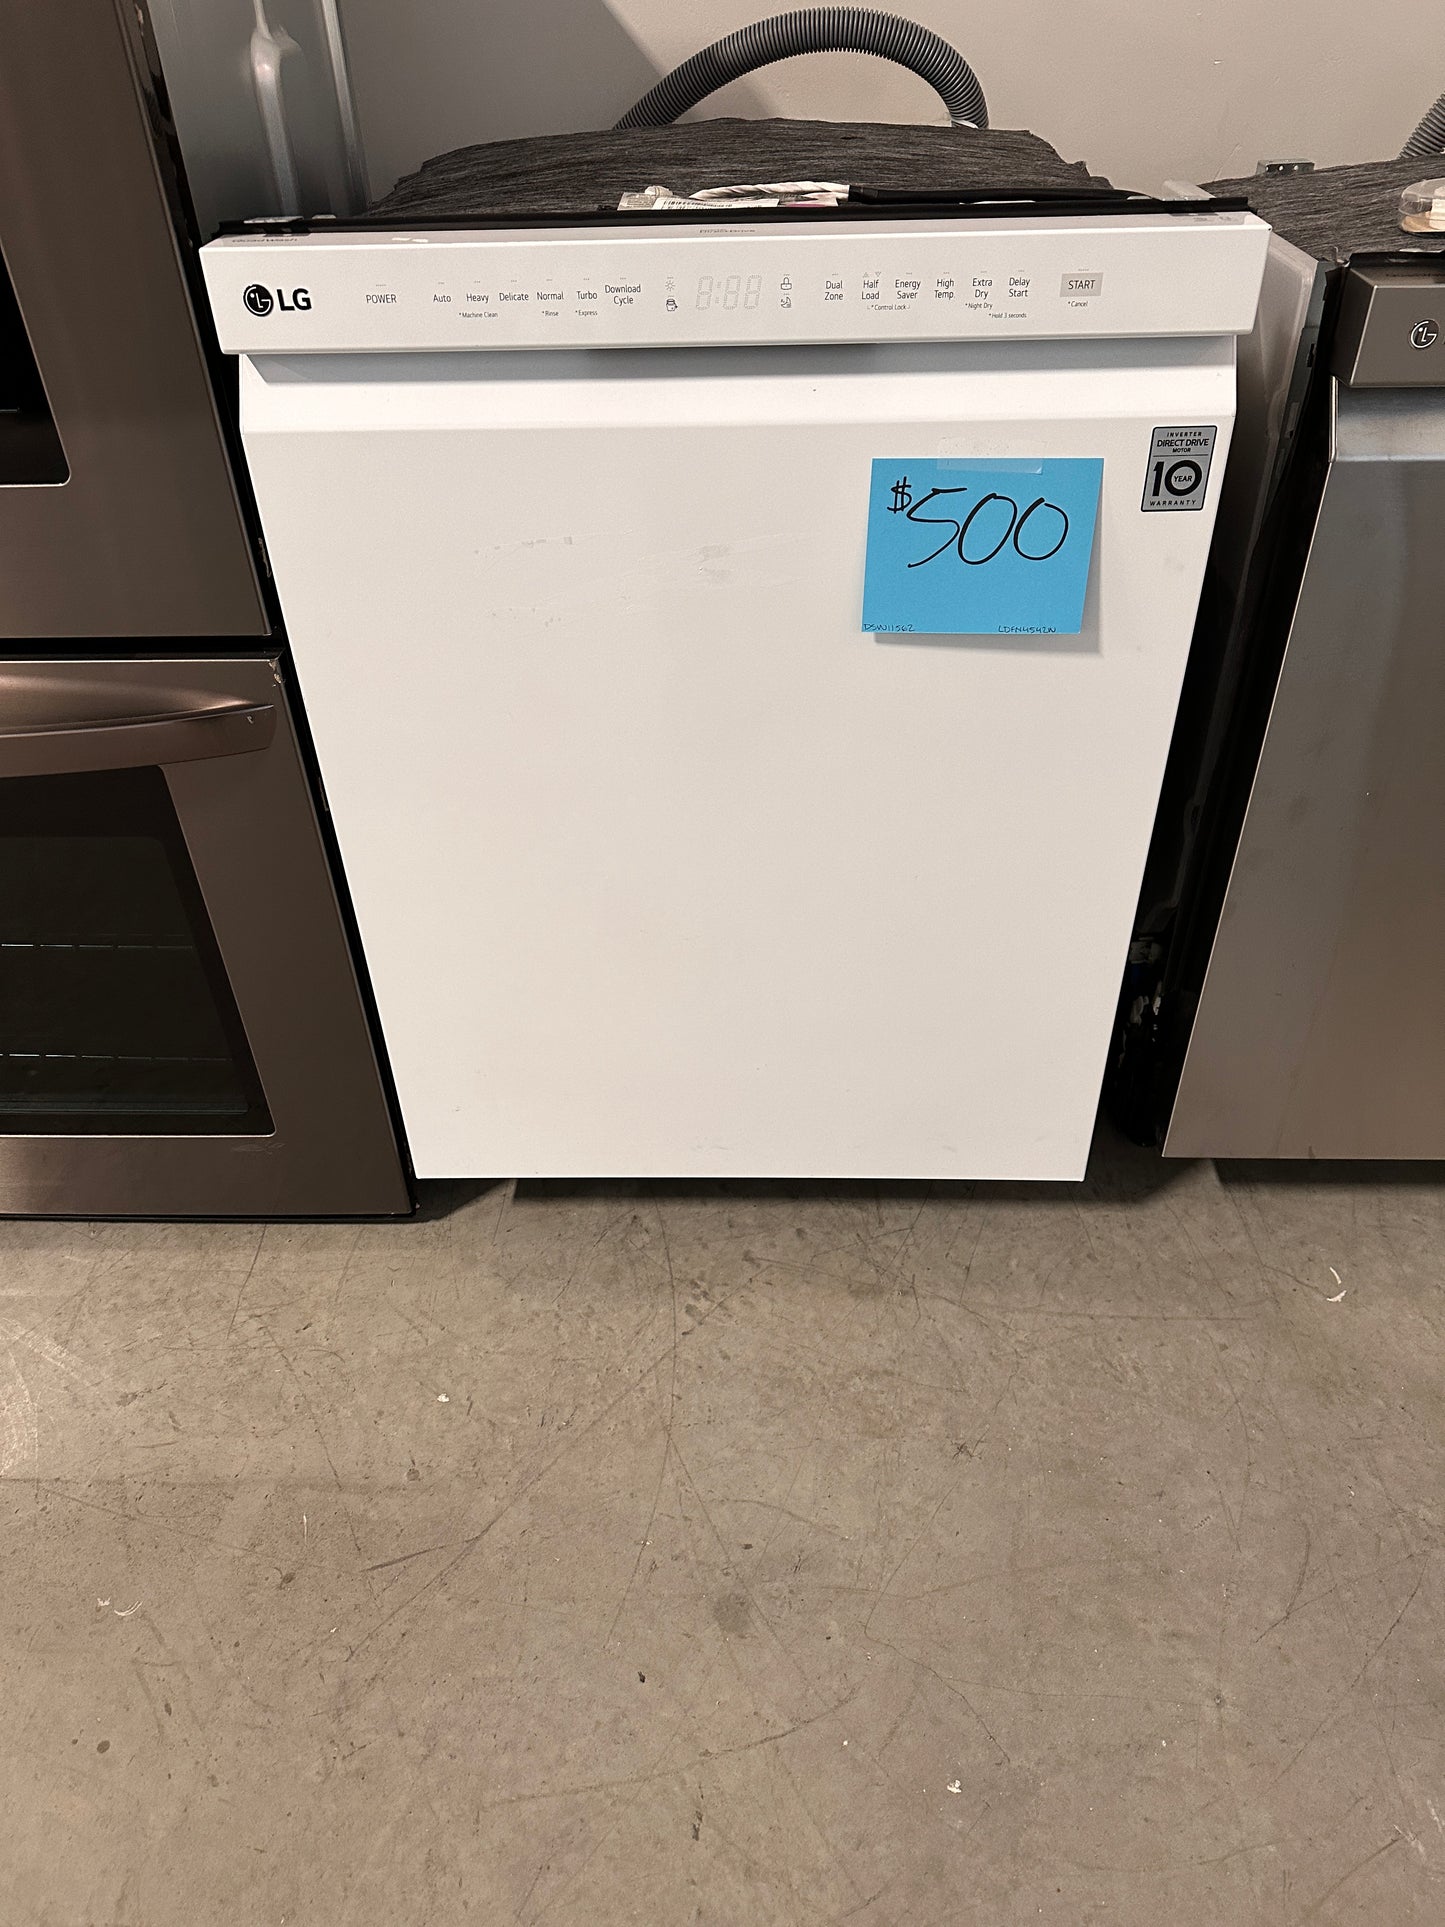 NEW LG DISHWASHER with 3RD RACK - DSW11562